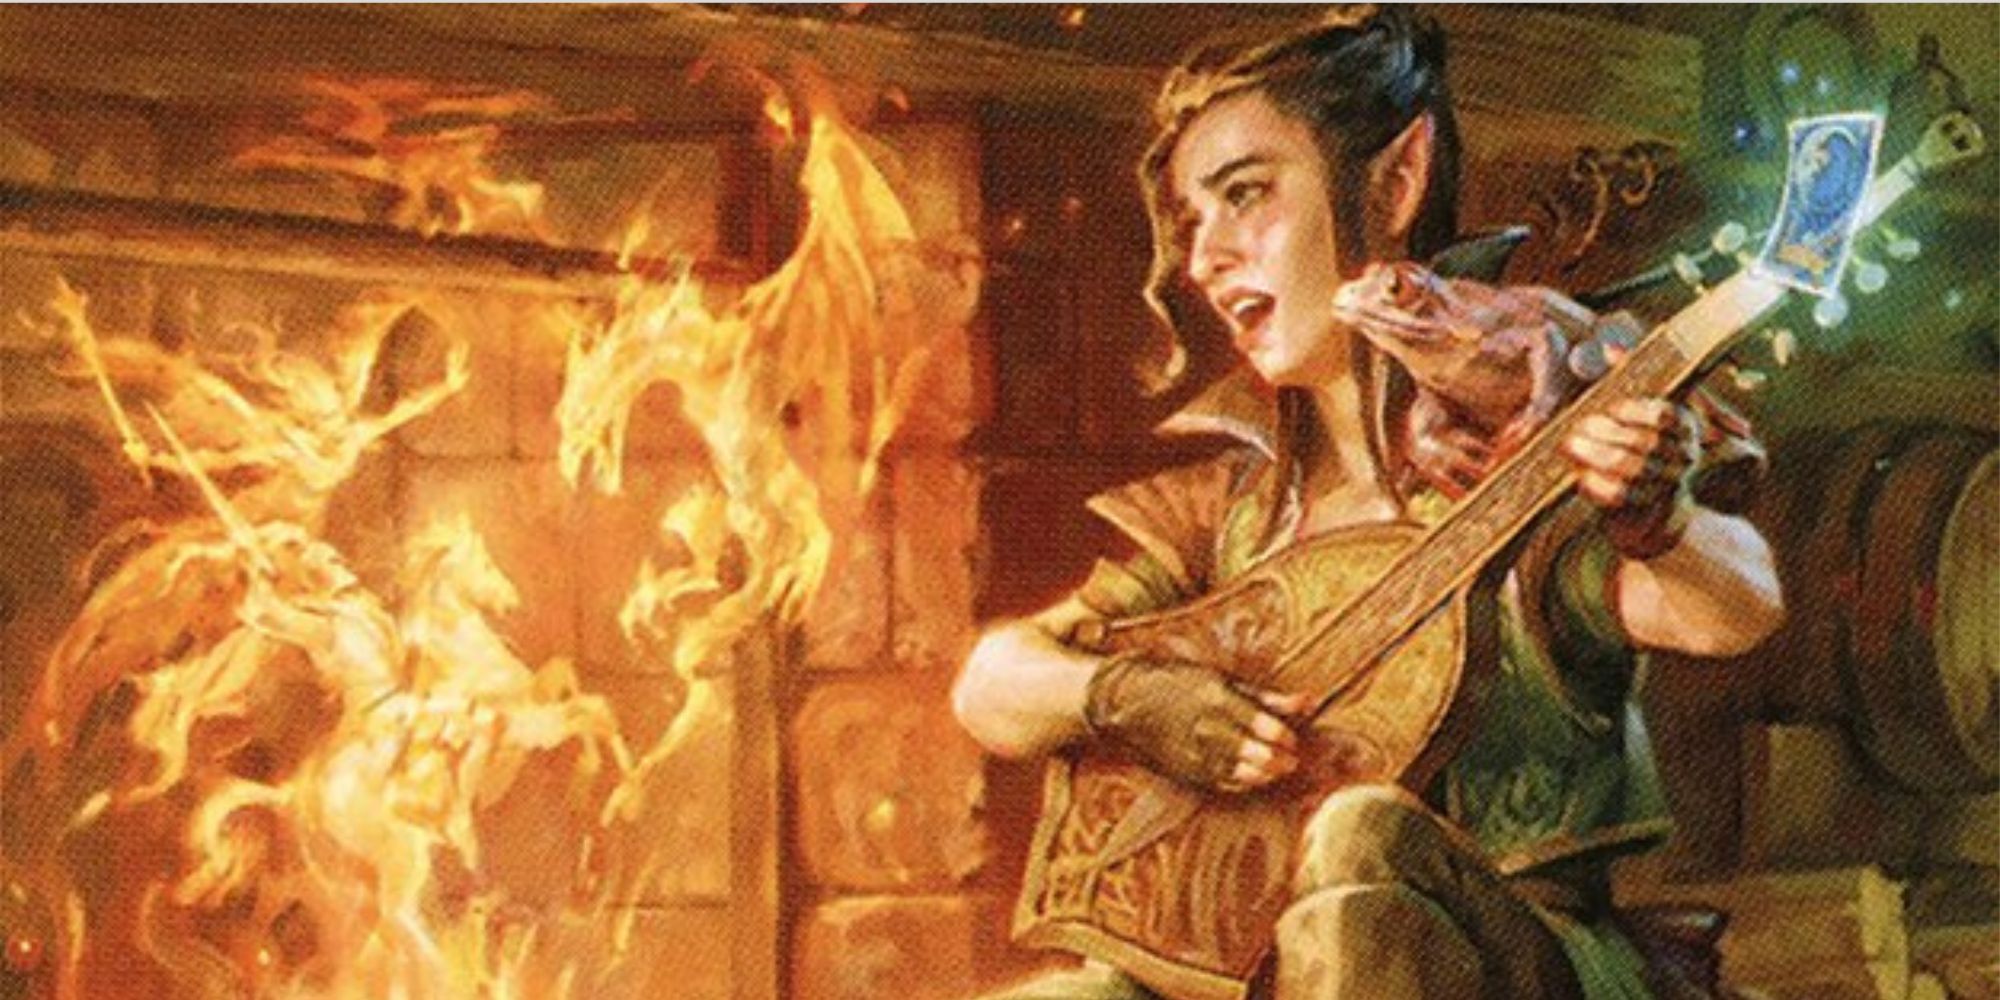 An elf bard plays her lute in front of a fire, which is taking the form of a knight fighting a dragon.